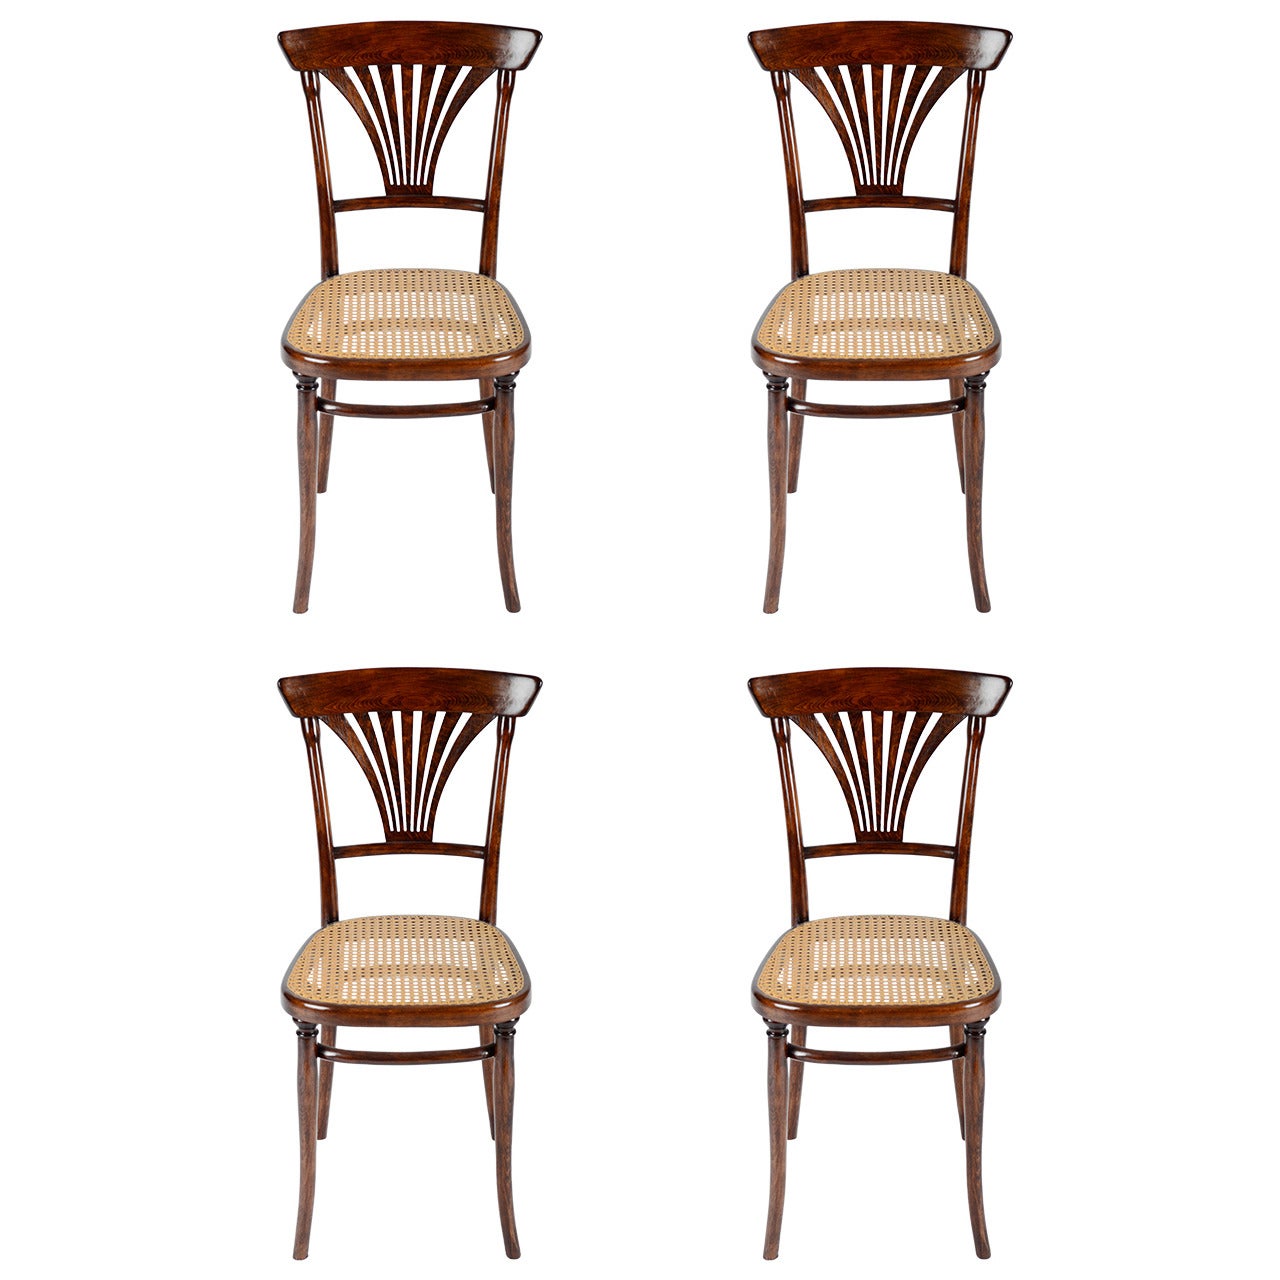 Thonet No. 221 Set of Four Chairs